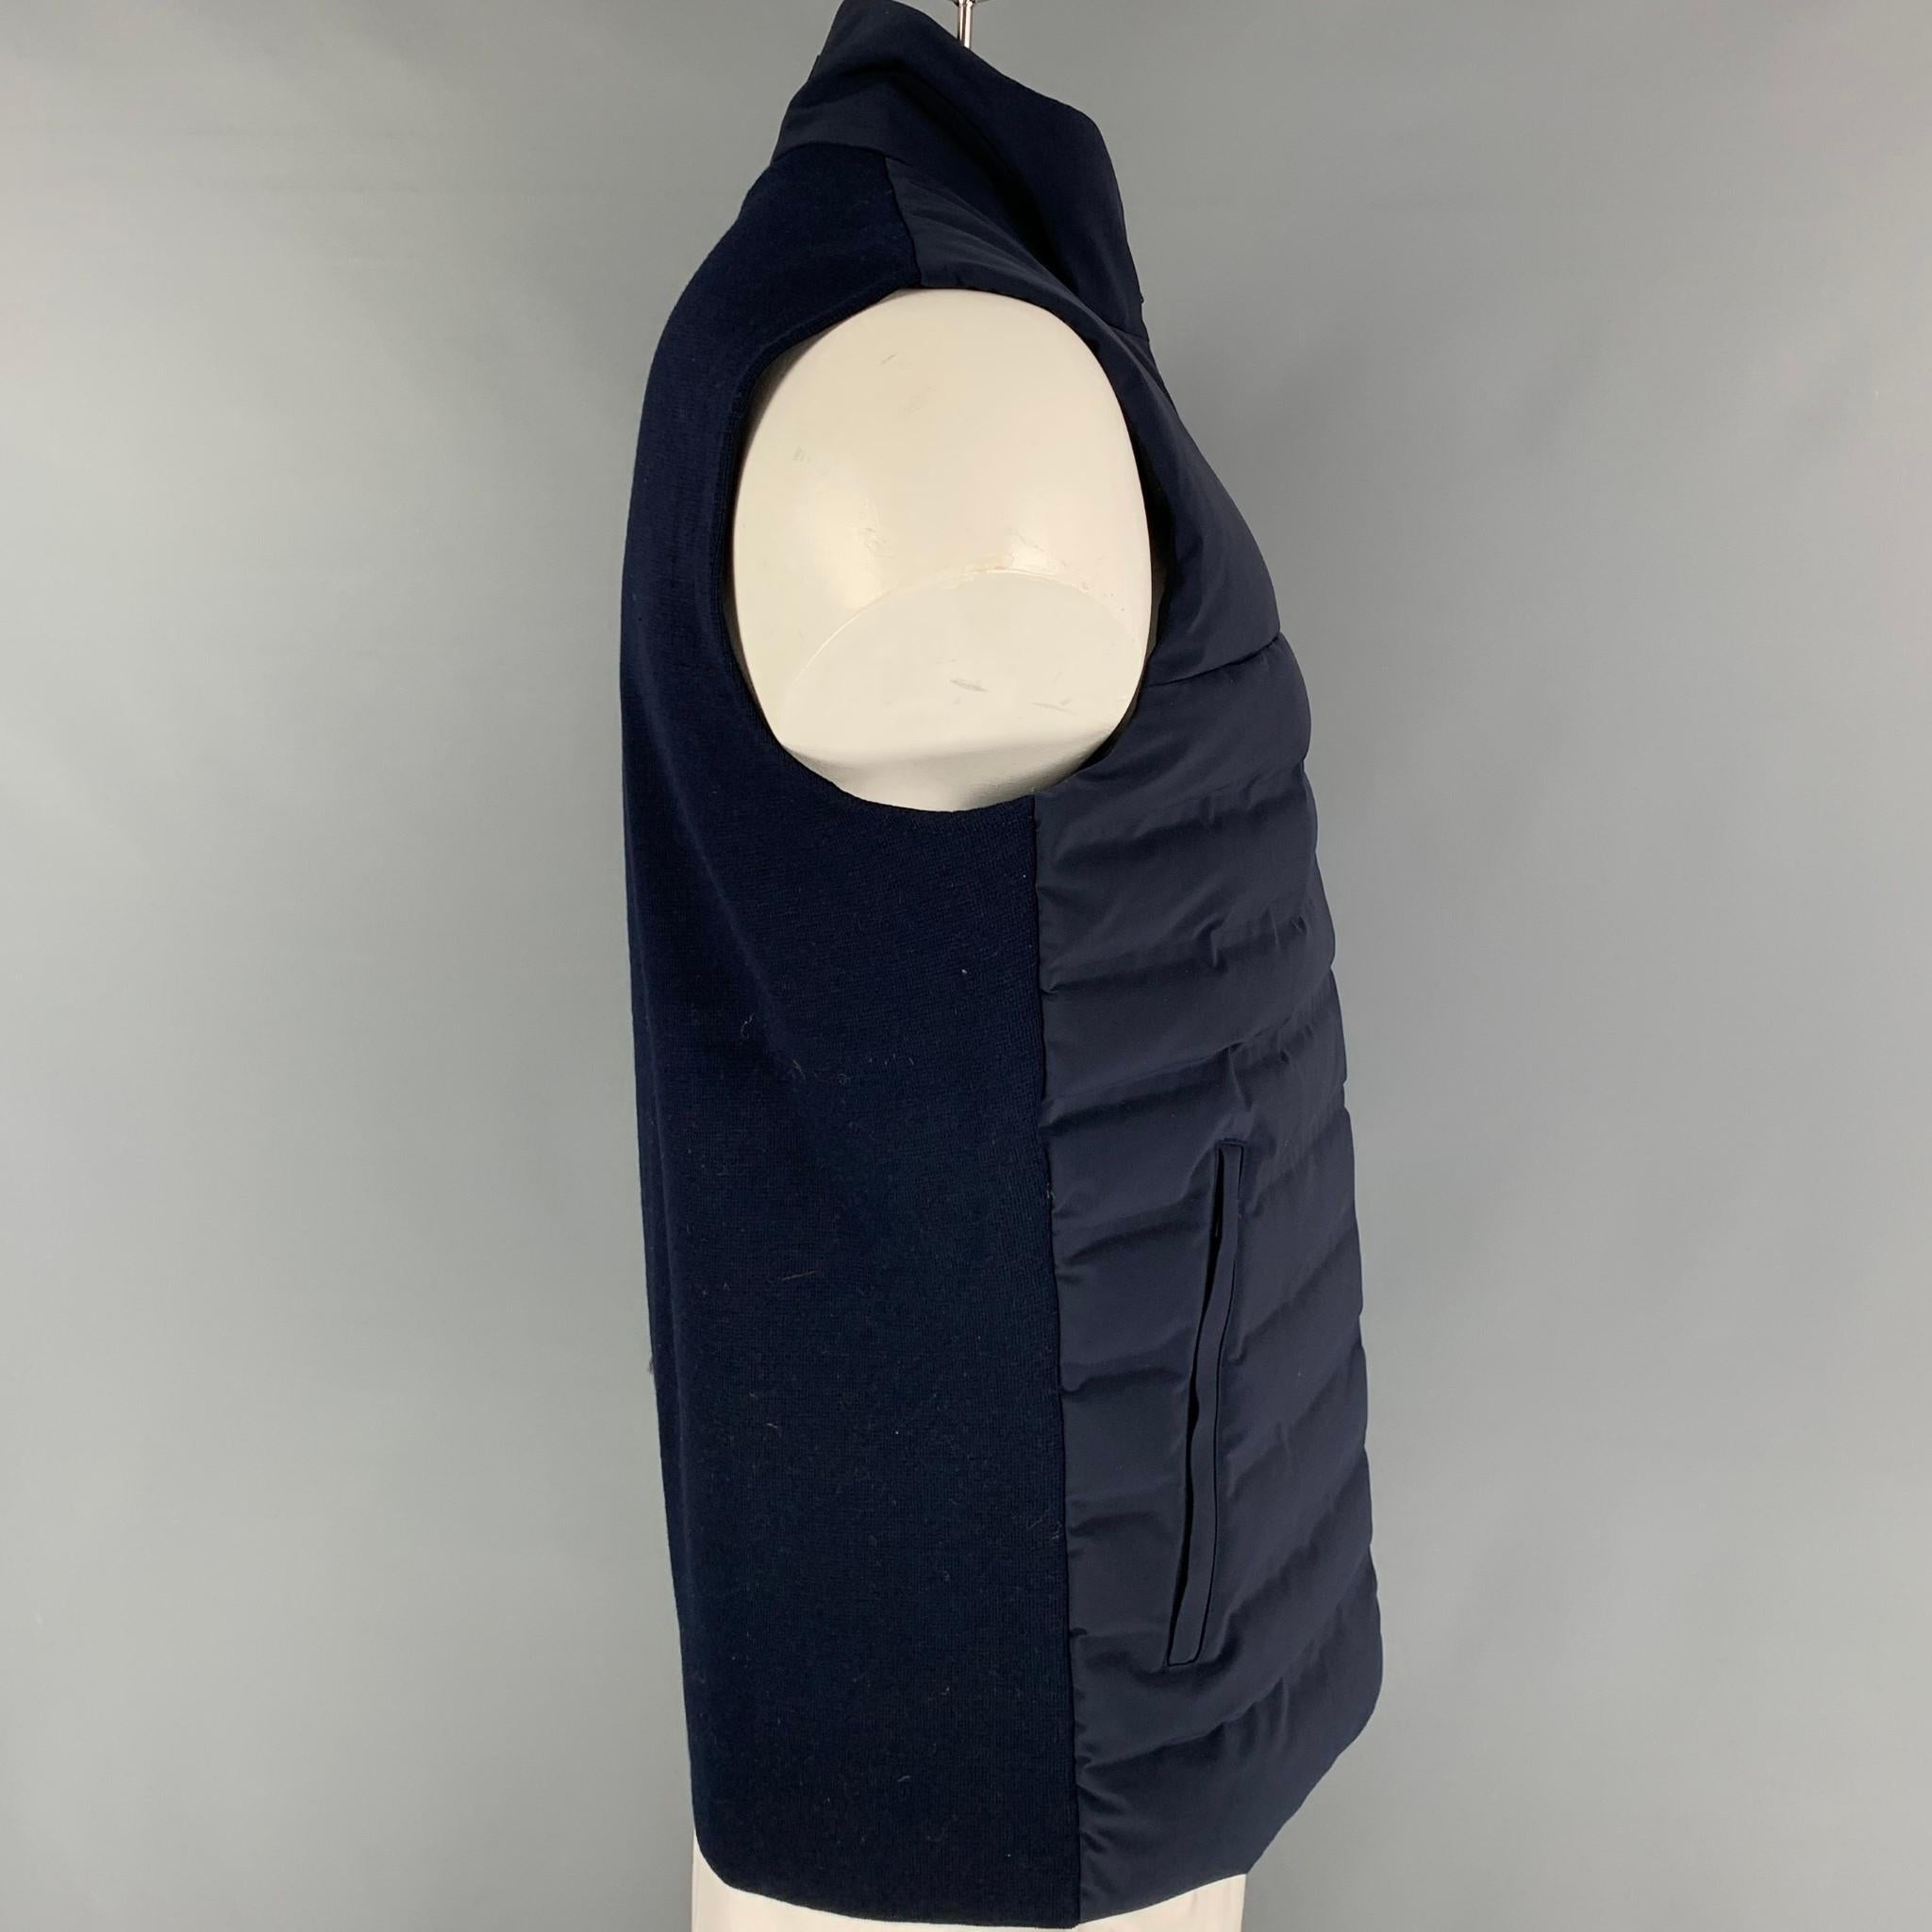 AZTECH 'Dale of Aspen' vest comes in a navy quilted polyamide with 'Dermizax' waterproof technology featuring a high collar, sleeveless, front pockets, and a full zip up closure. 

New With Tags. 
Marked: L
Original Retail Price: